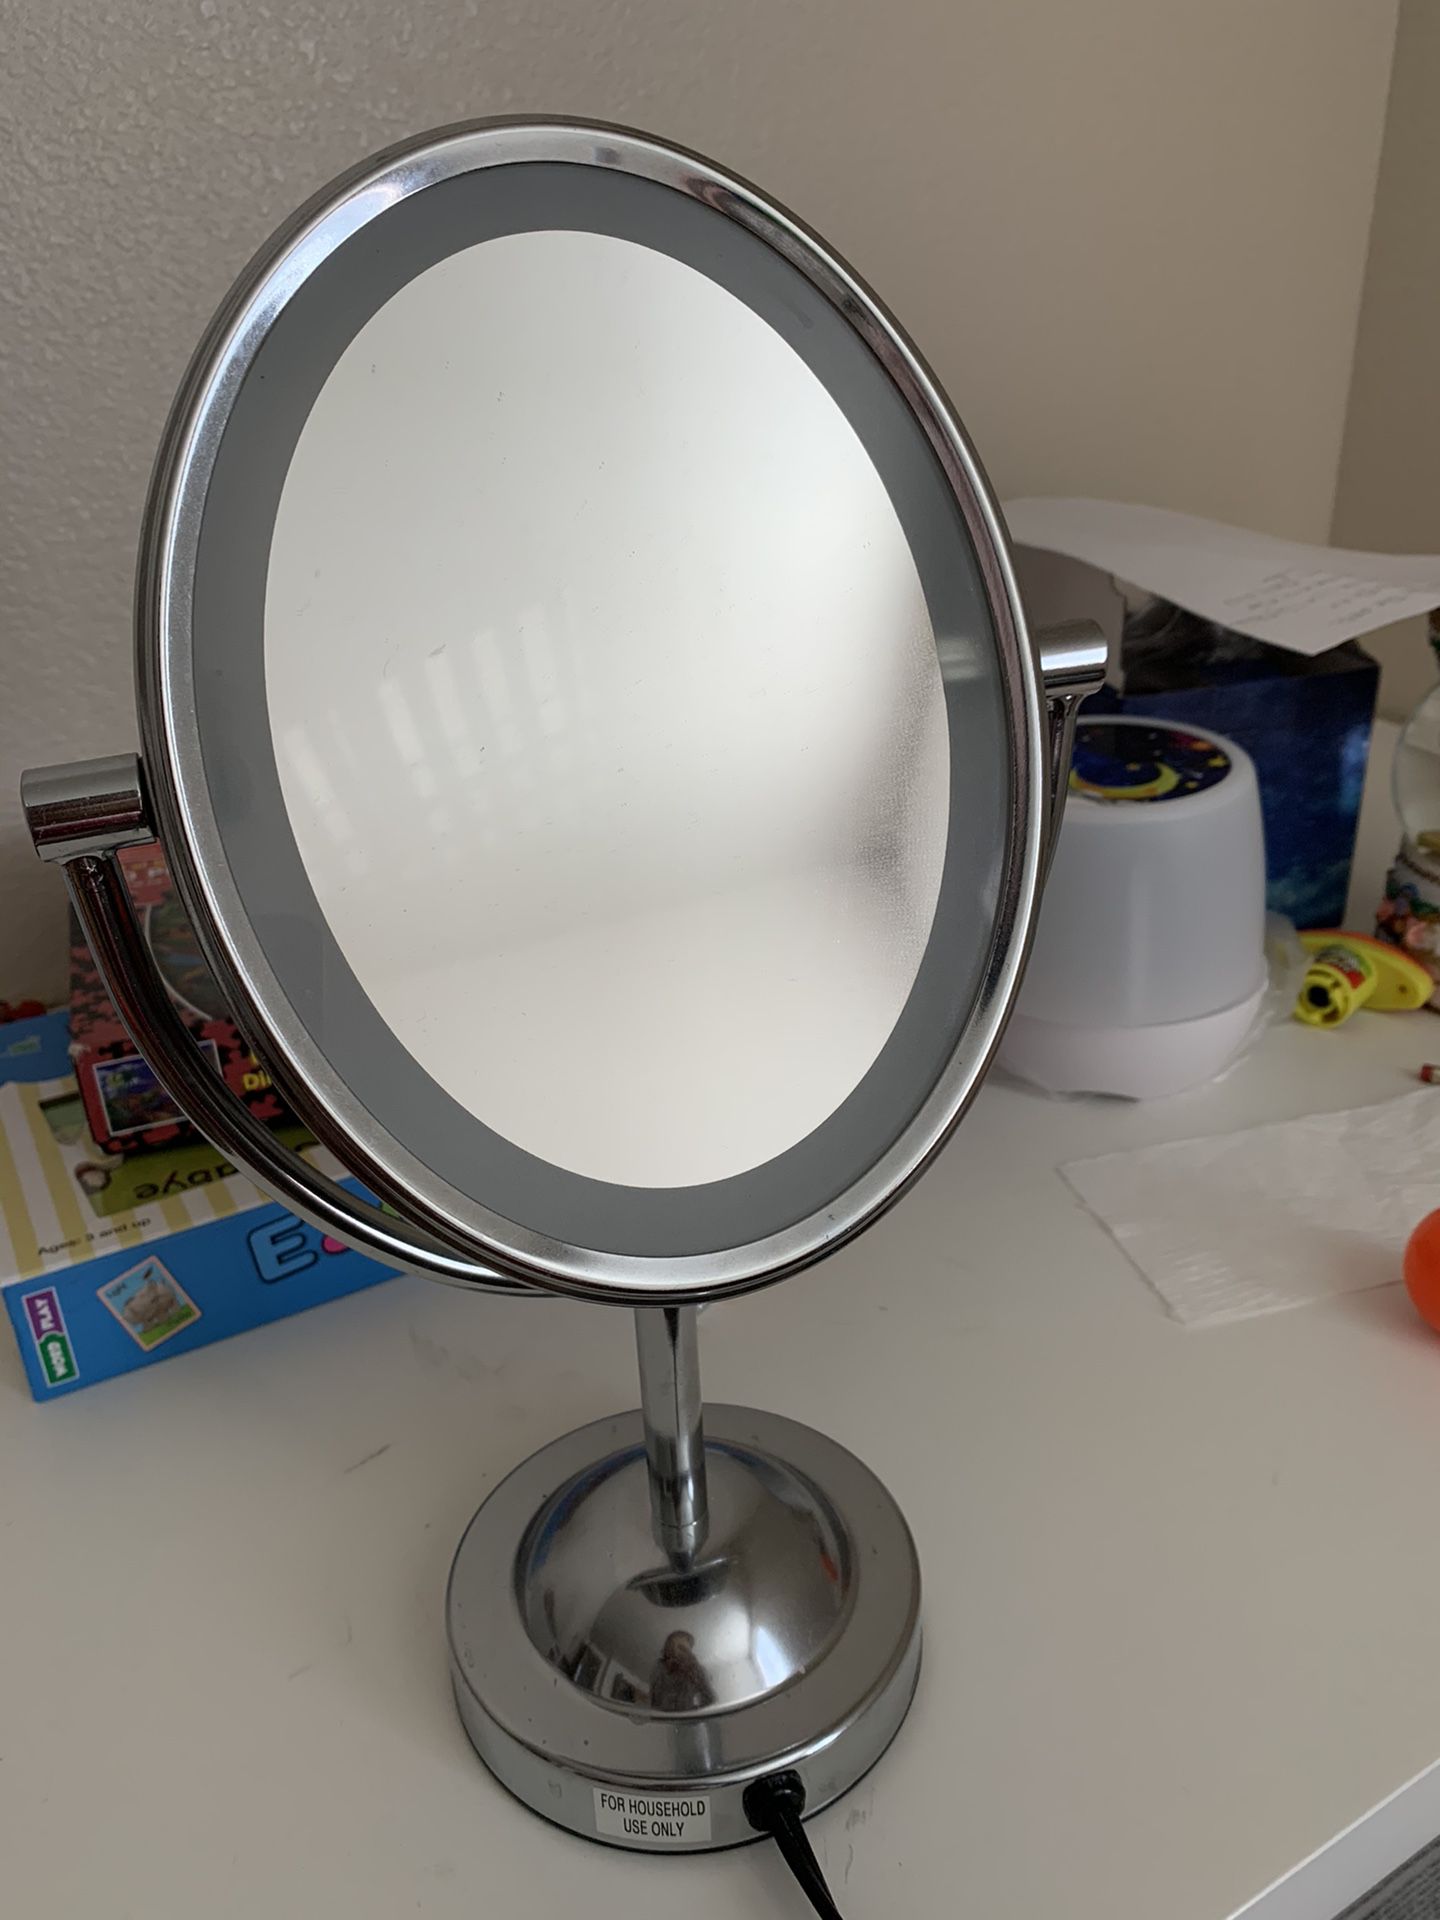 Conair Reflections Double-Sided Lighted Vanity Makeup Mirror, 1x/7x magnification